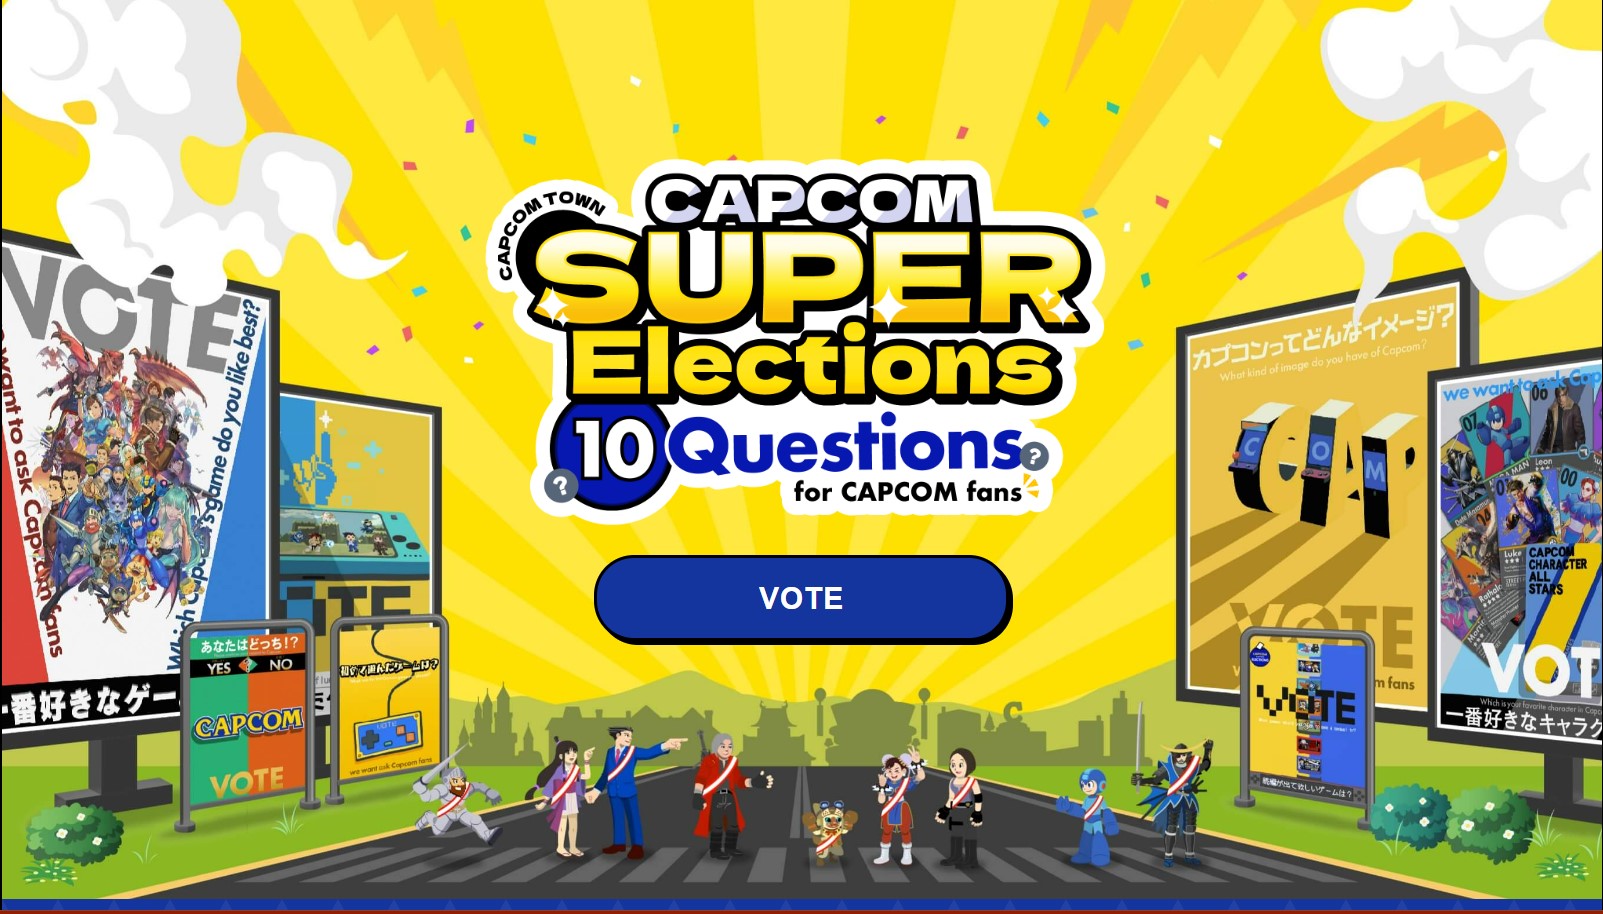 Capcom Wants To Create Games Fans Want To Play, New Survey Suggests